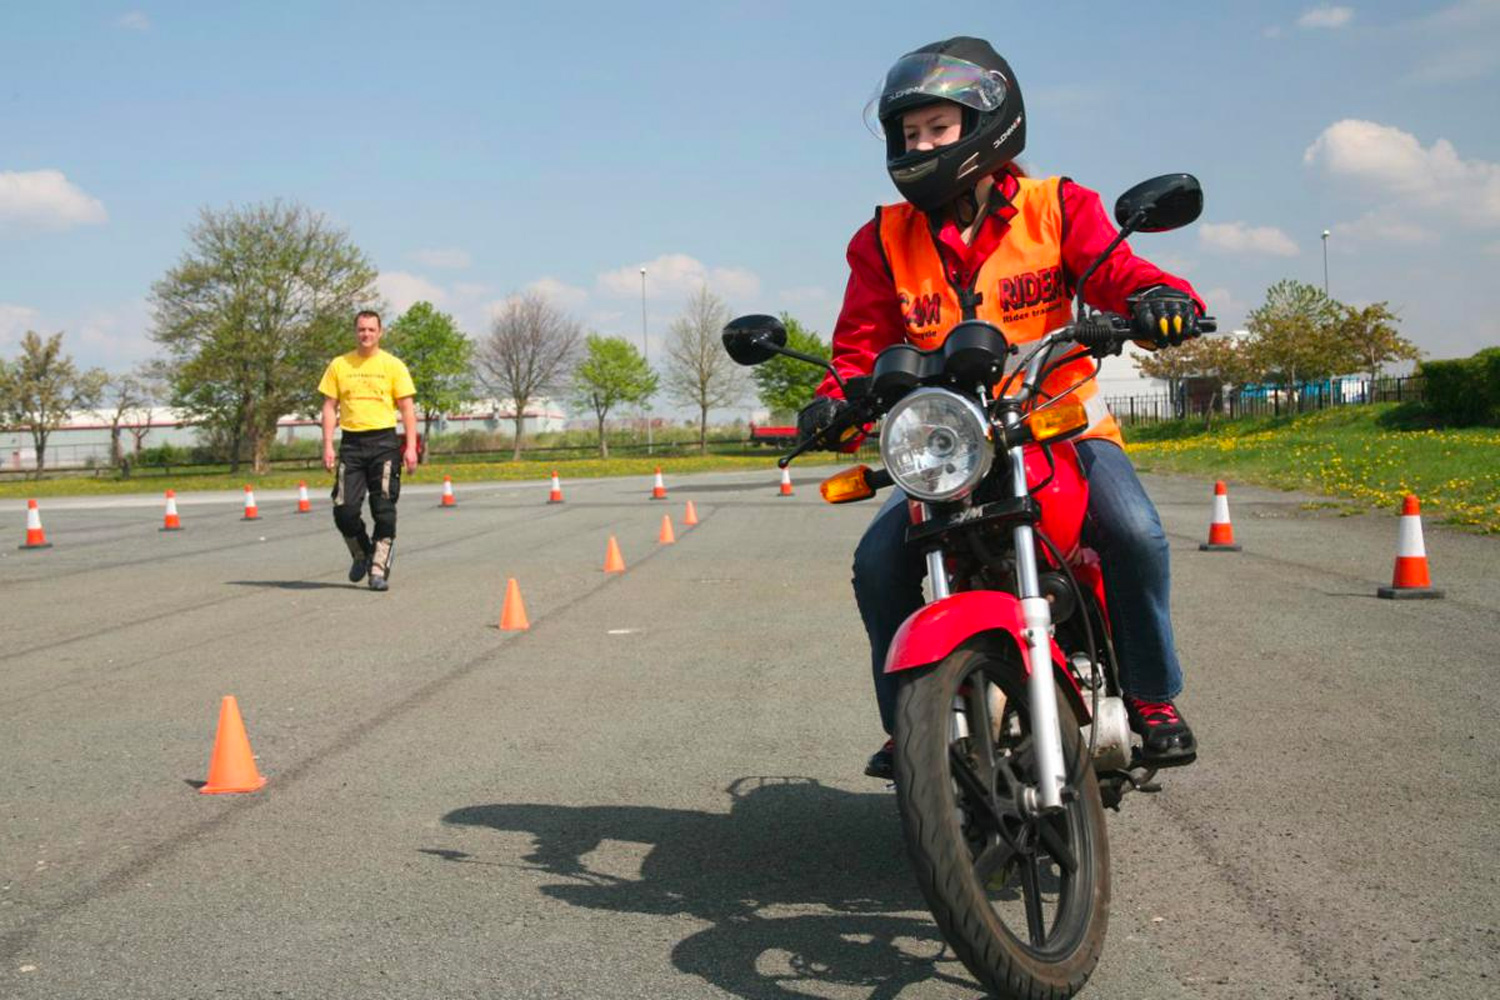 A motorcyclist rides next to a line of pylons in a car park area